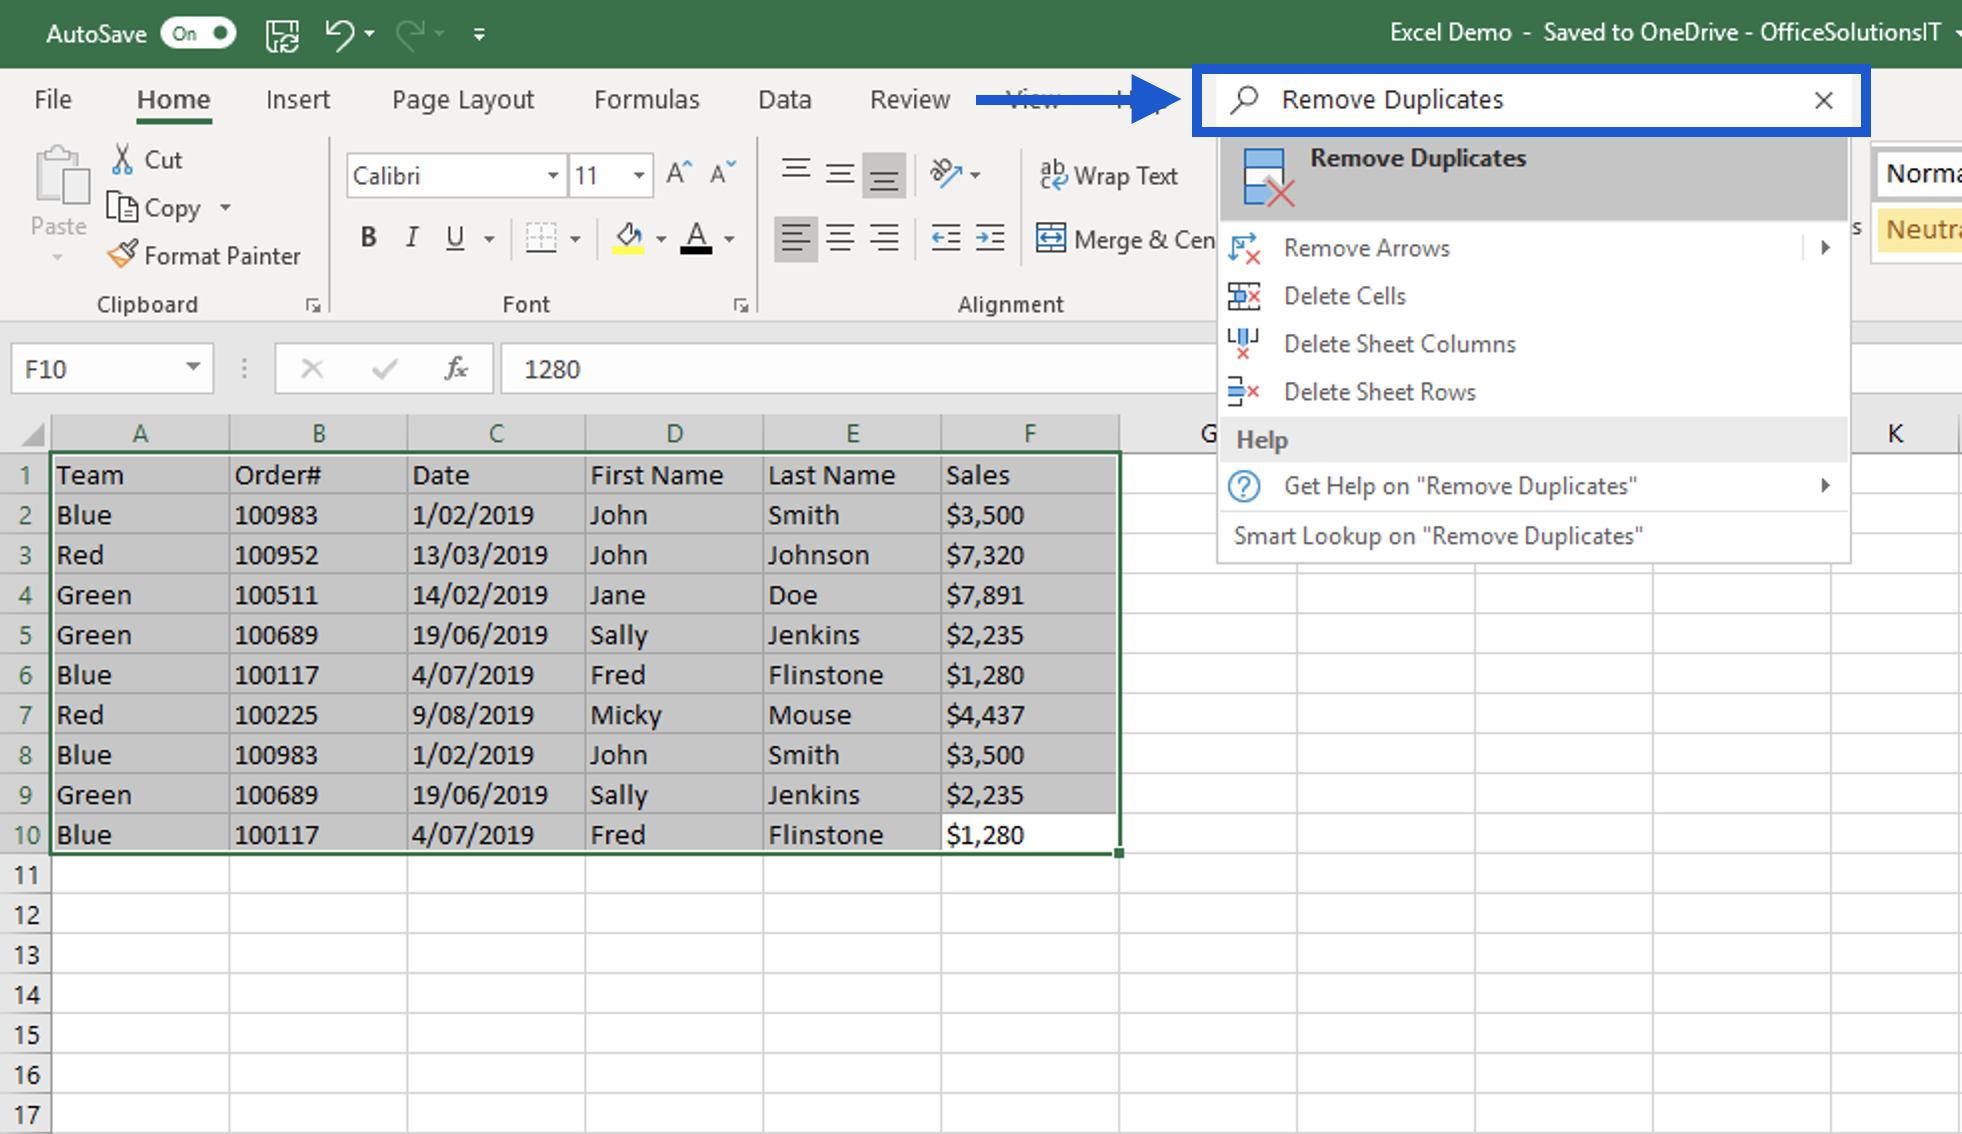 Excel Tips - Tell Me